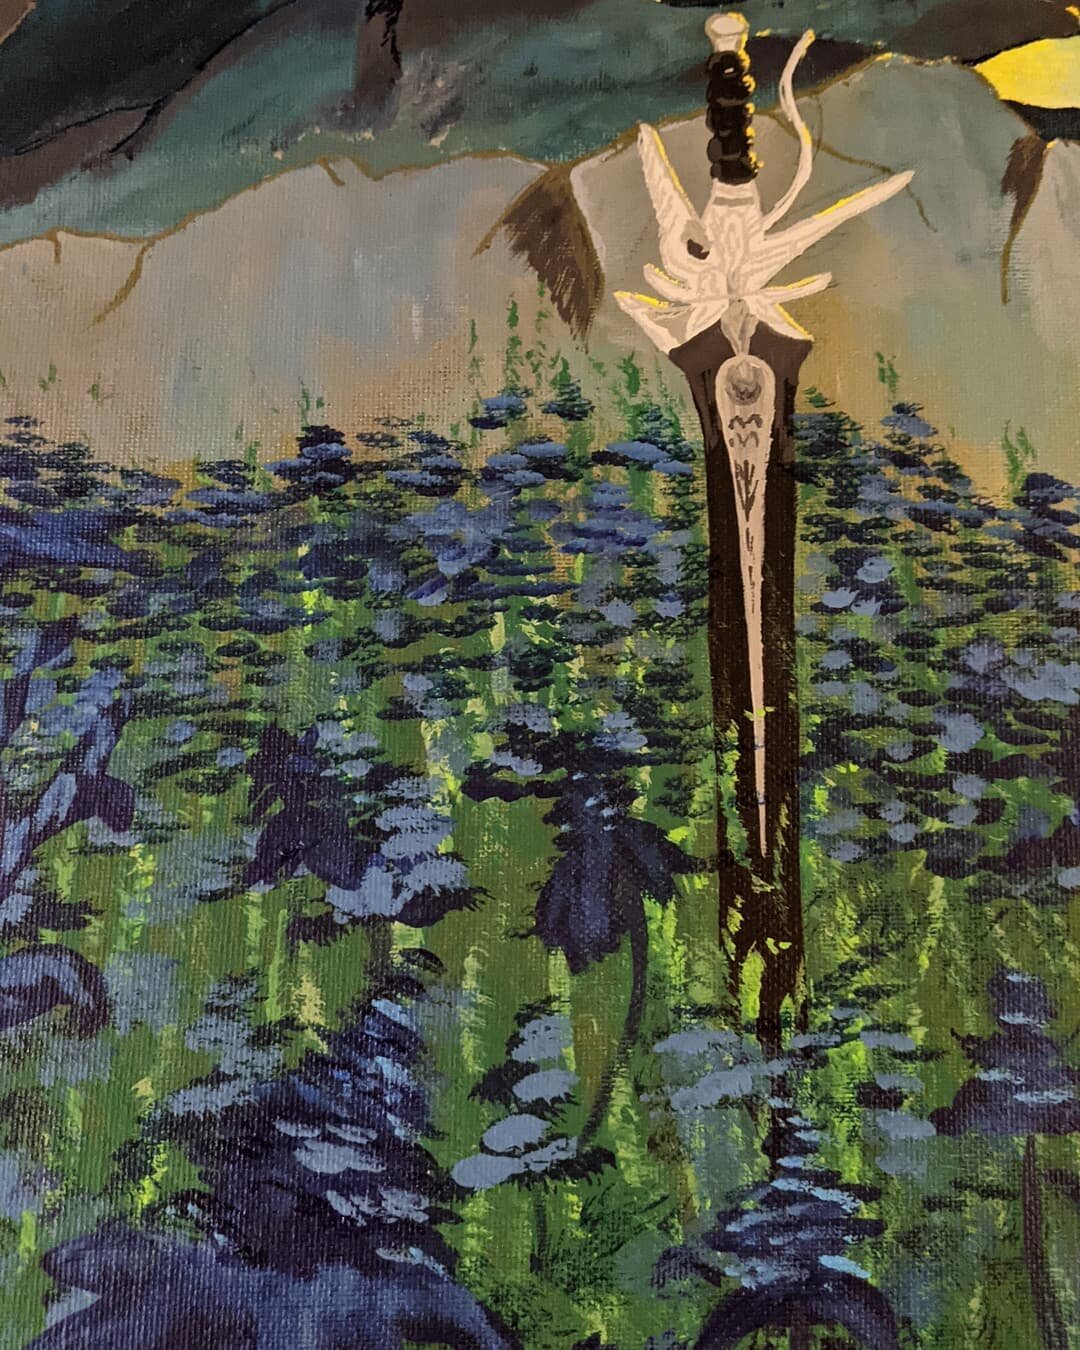 I need to work on this some more, but I'm pleased with how the sword and sylleblossom turned out. The hills and arches still need work and I have text to add, but not bad for three hours of painting. #acrylicpaints #acrylics #acrylicpainting #ffxv #f